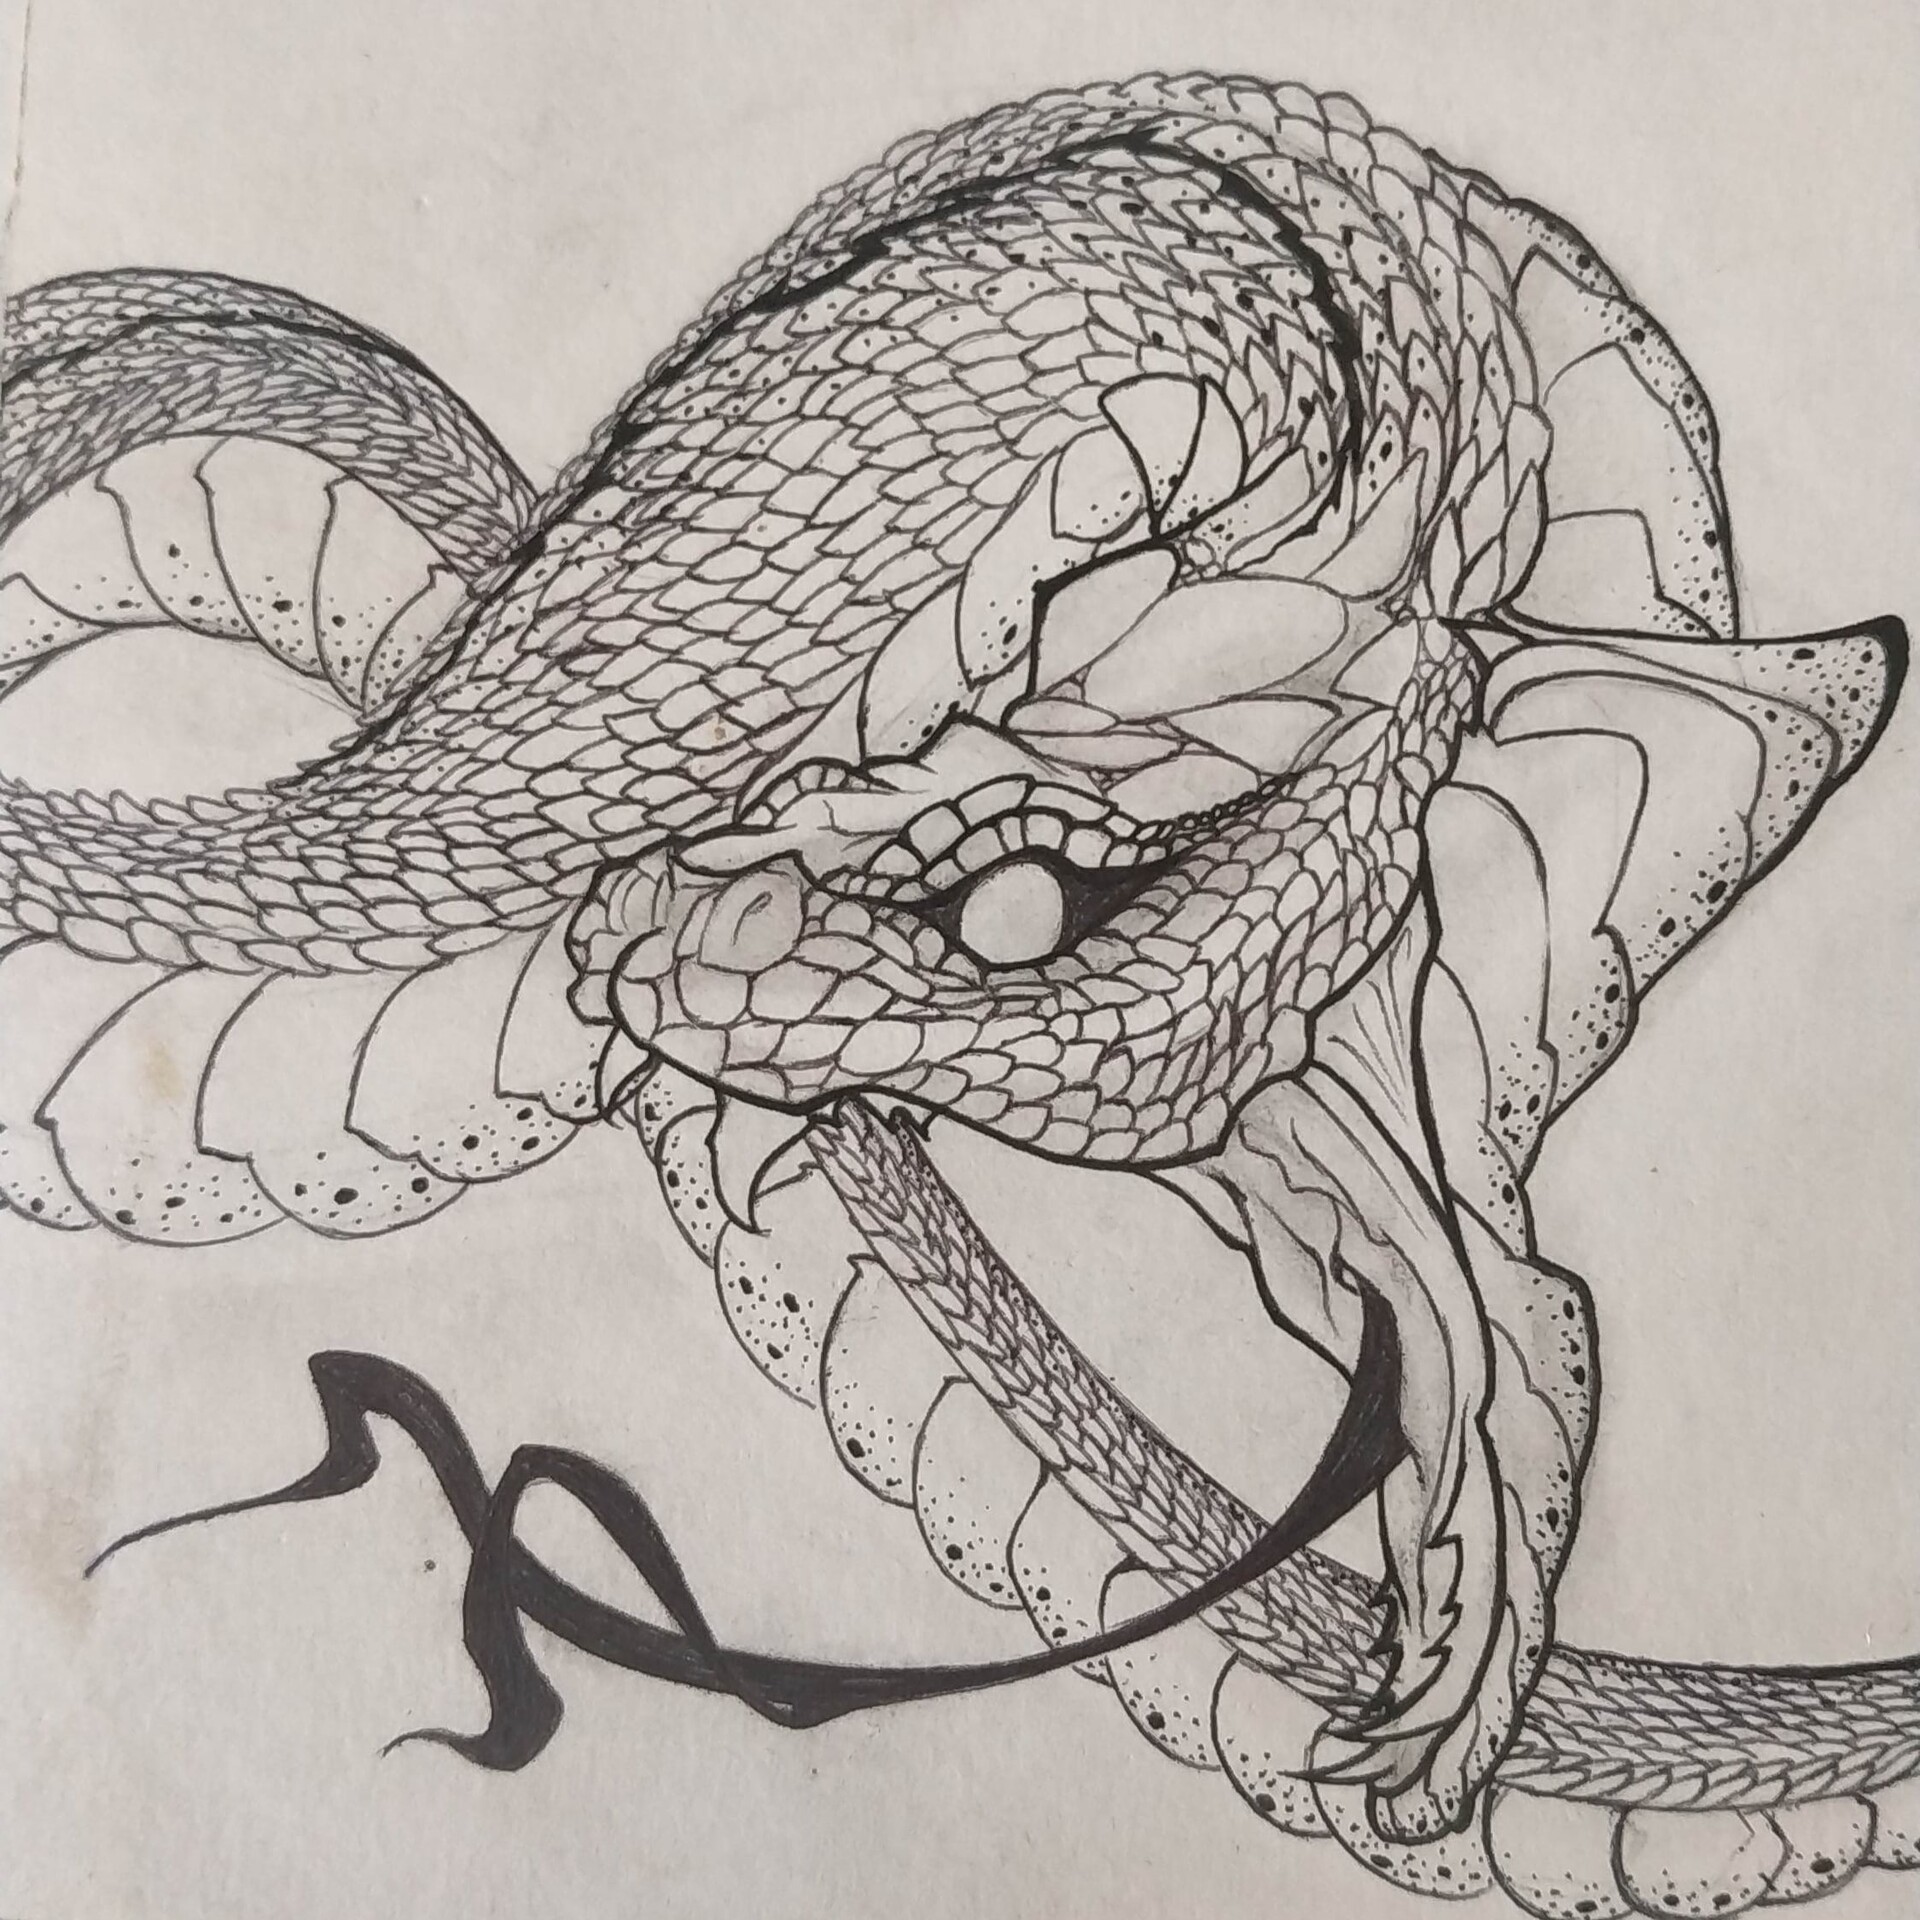 Tattoo uploaded by Dylan C • Montreal snake sketch style tattoo • Tattoodo